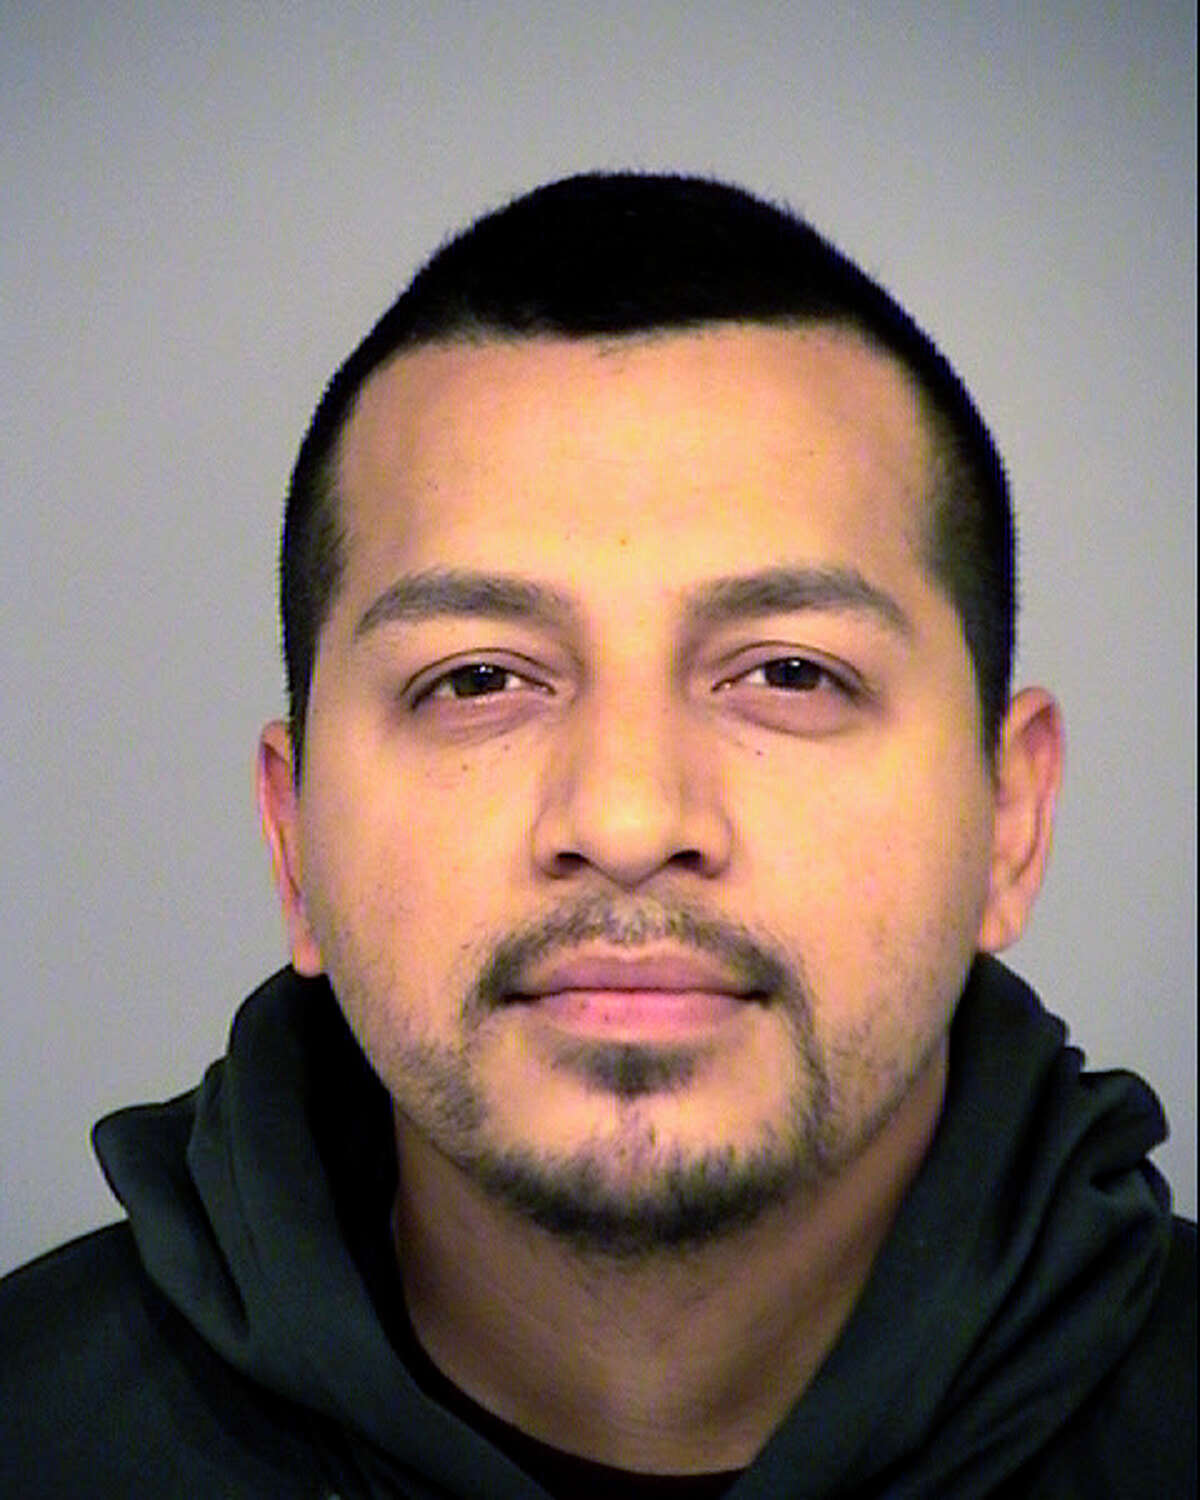 In this June 14, 2017 photo released by the Ventura County Sheriff's Office shows suspect Carlos Chavez, 28, of Oxnard, Calif. The Ventura County Sheriff's Department says three workers at a Southern California produce company were arrested Wednesday in the theft of up to $300,000 worth of avocados. Chavez, Joseph Valenzuela and Rahim Leblanc are each charged with grand theft of fruit and are being held on bails of $250,000. (Ventura County Sheriff's Office via AP)